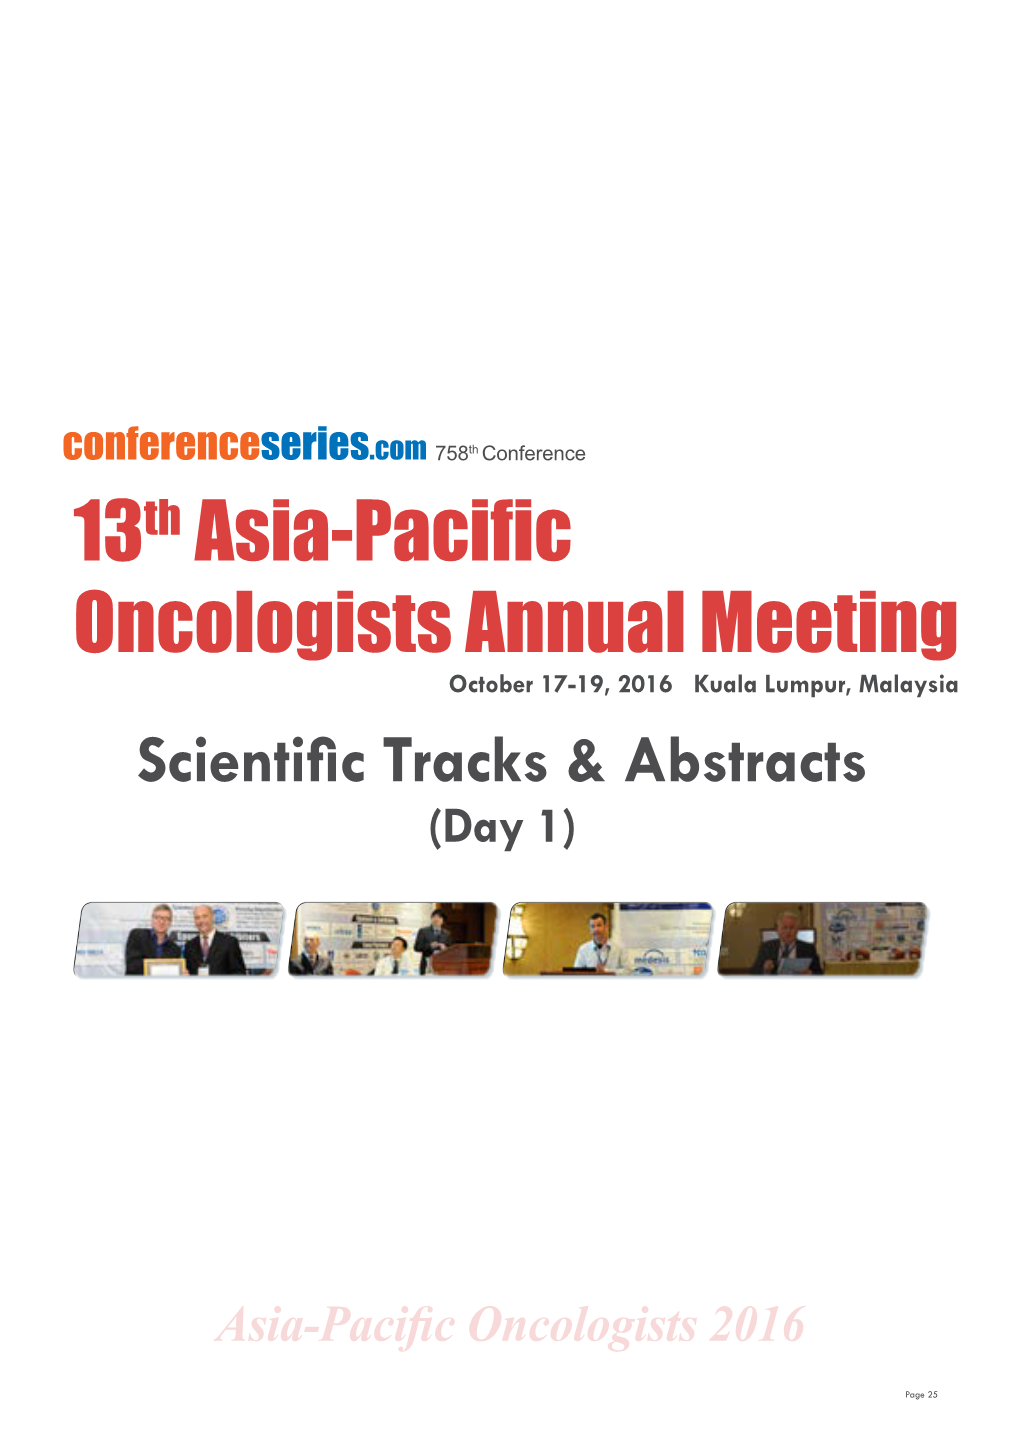 13Th Asia-Pacific Oncologists Annual Meeting October 17-19, 2016 Kuala Lumpur, Malaysia Scientific Tracks & Abstracts (Day 1)